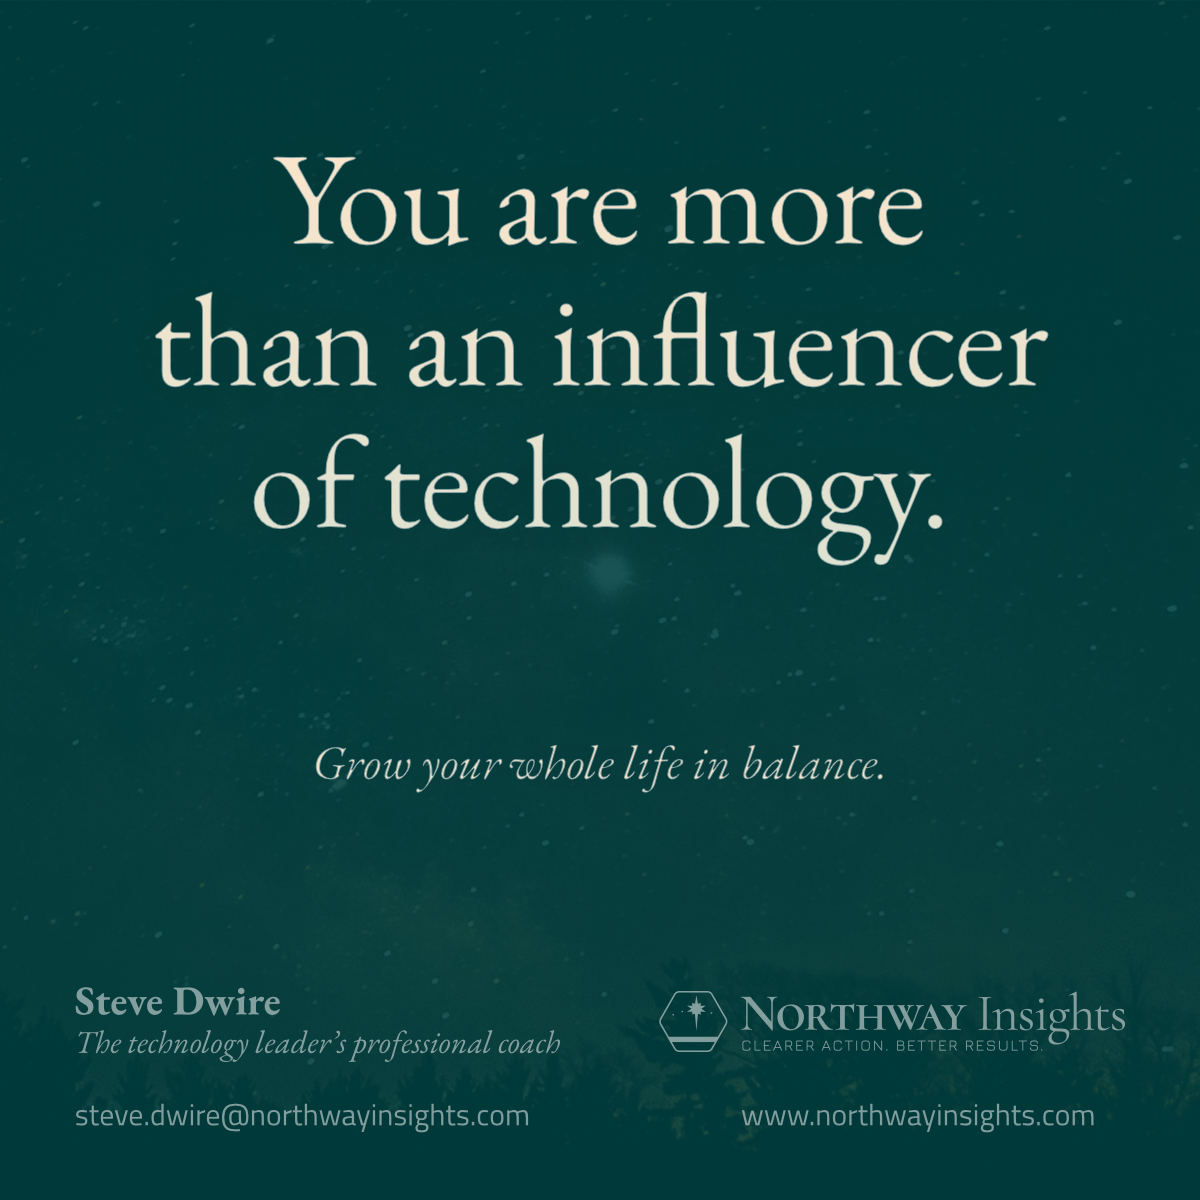 You are more than an influencer of technology